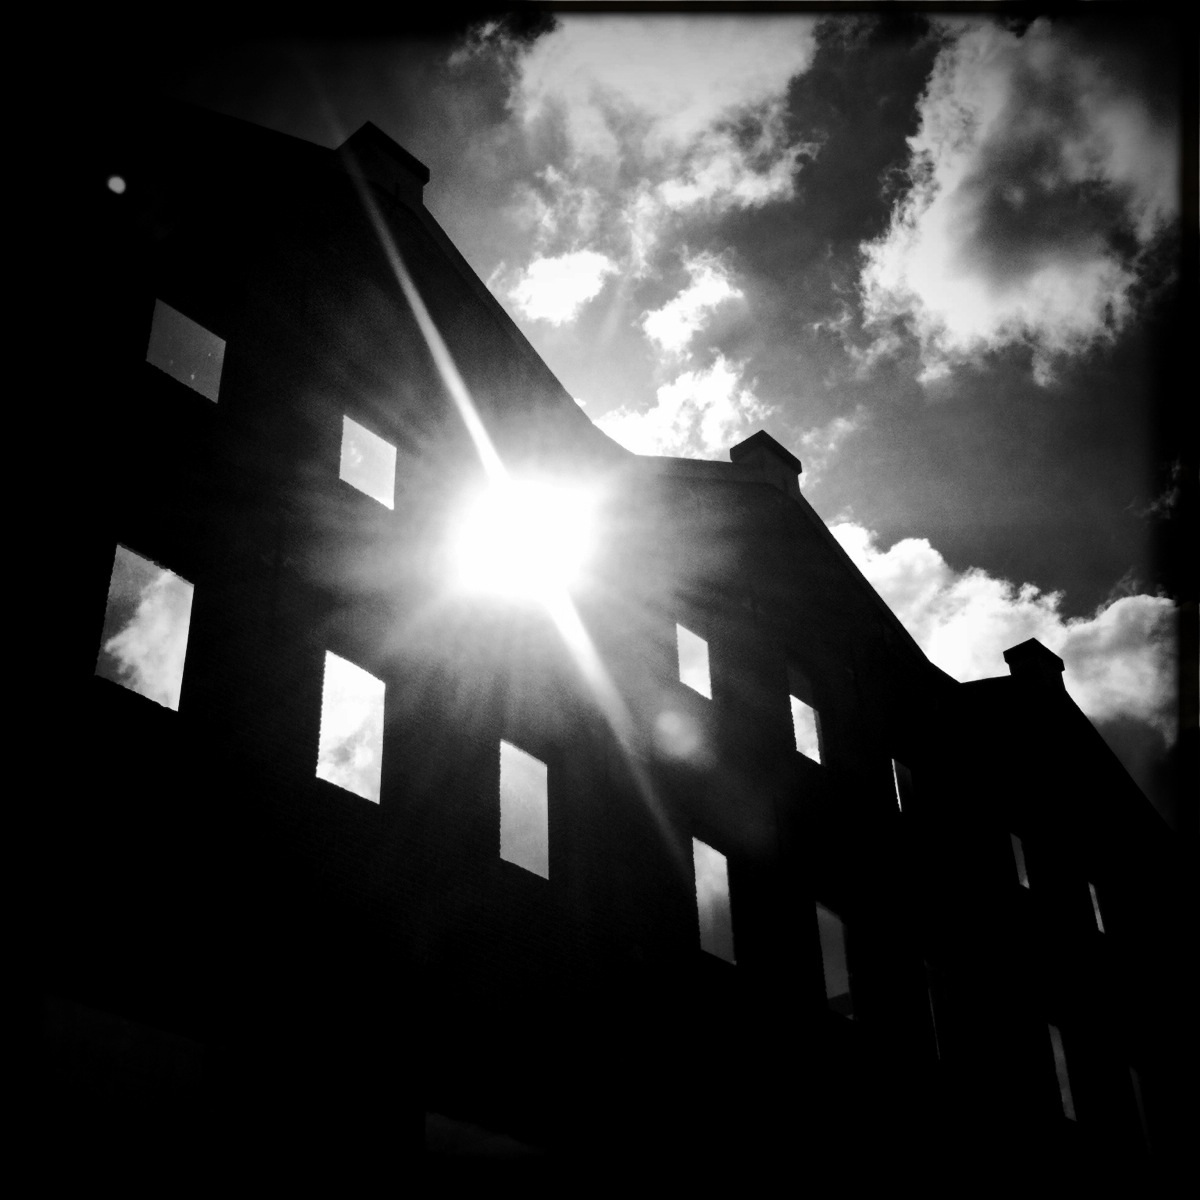 Dramatic black and white photograph oath façade of old warehouses in Amsterdam